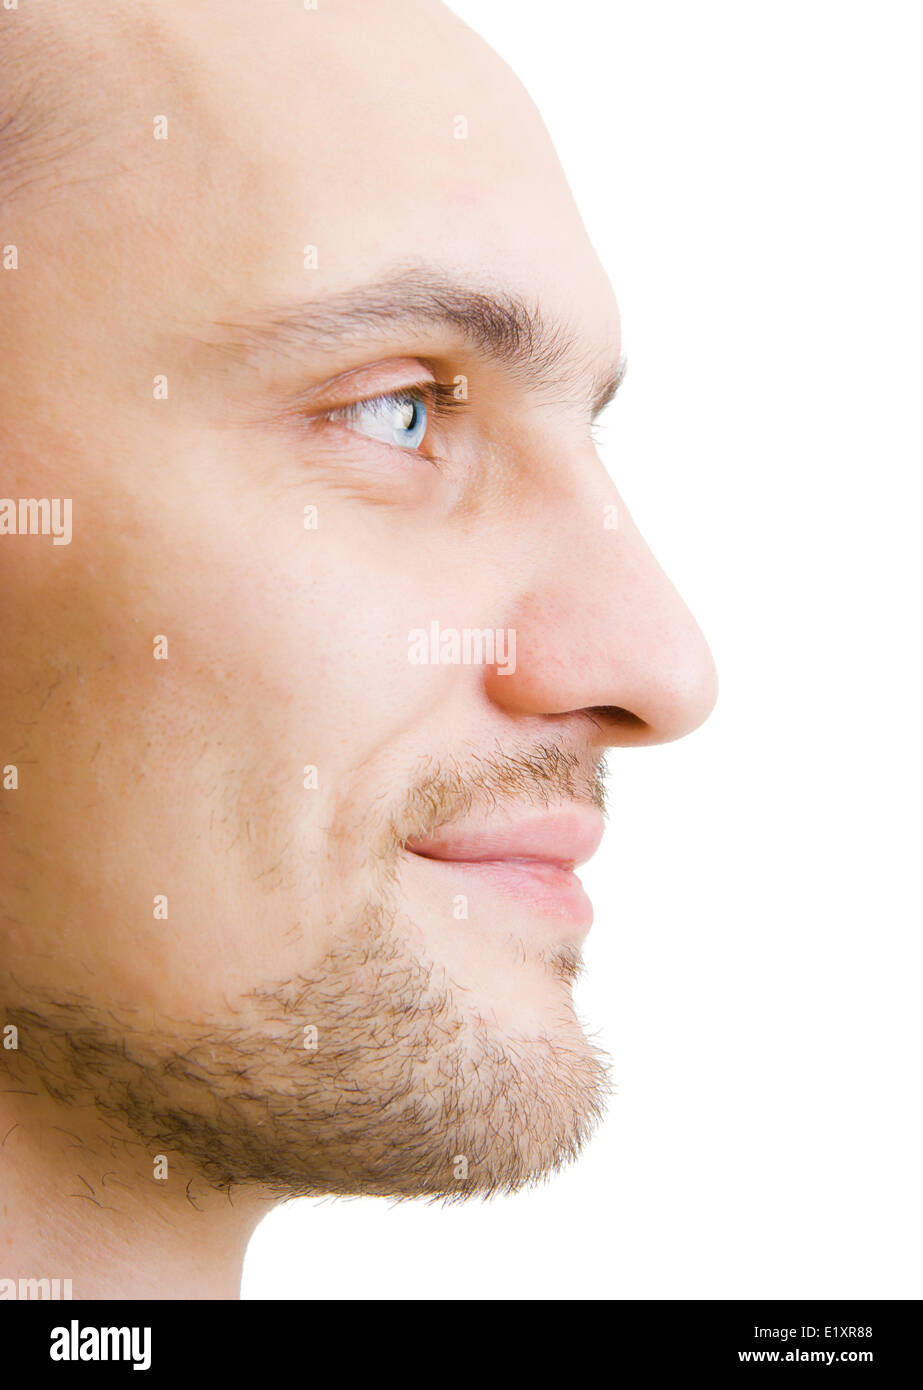 face unshaven young man in profile Stock Photo